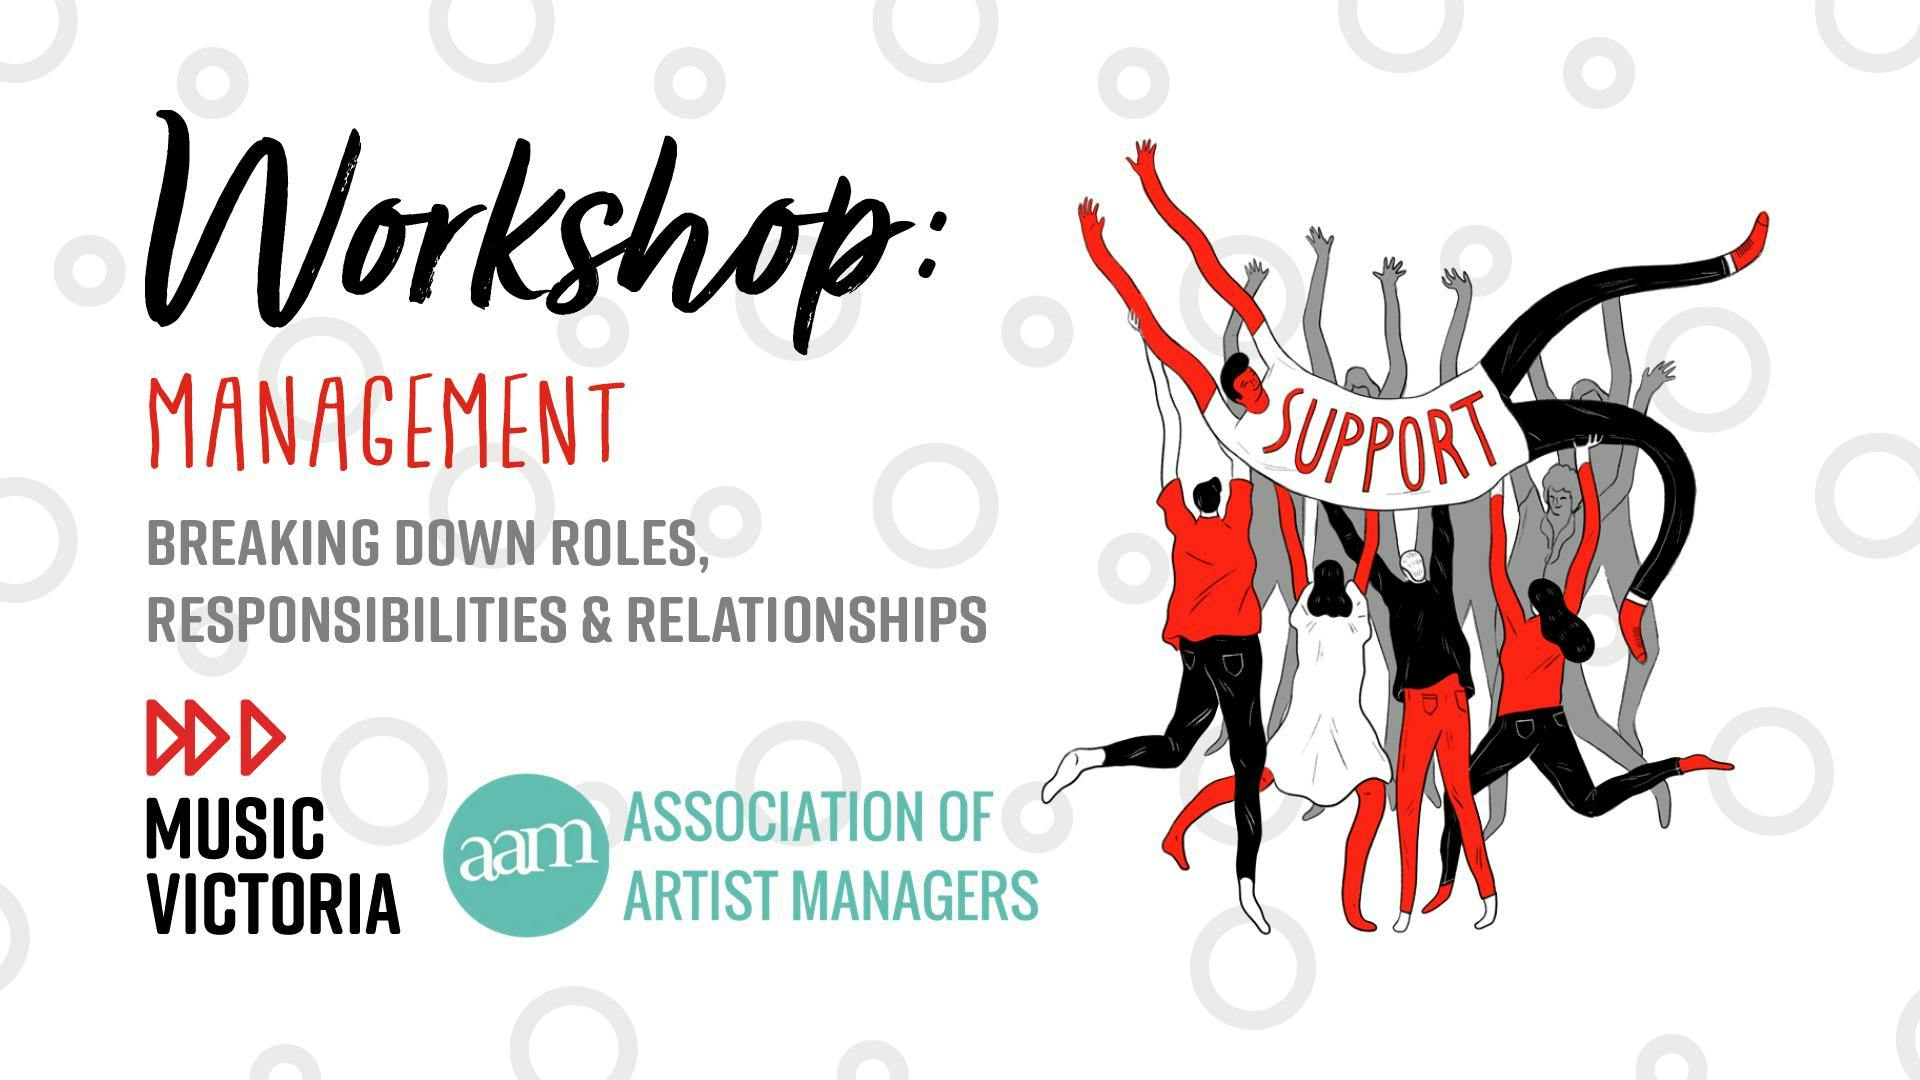 Management – Breaking down roles, responsibilities and relationships